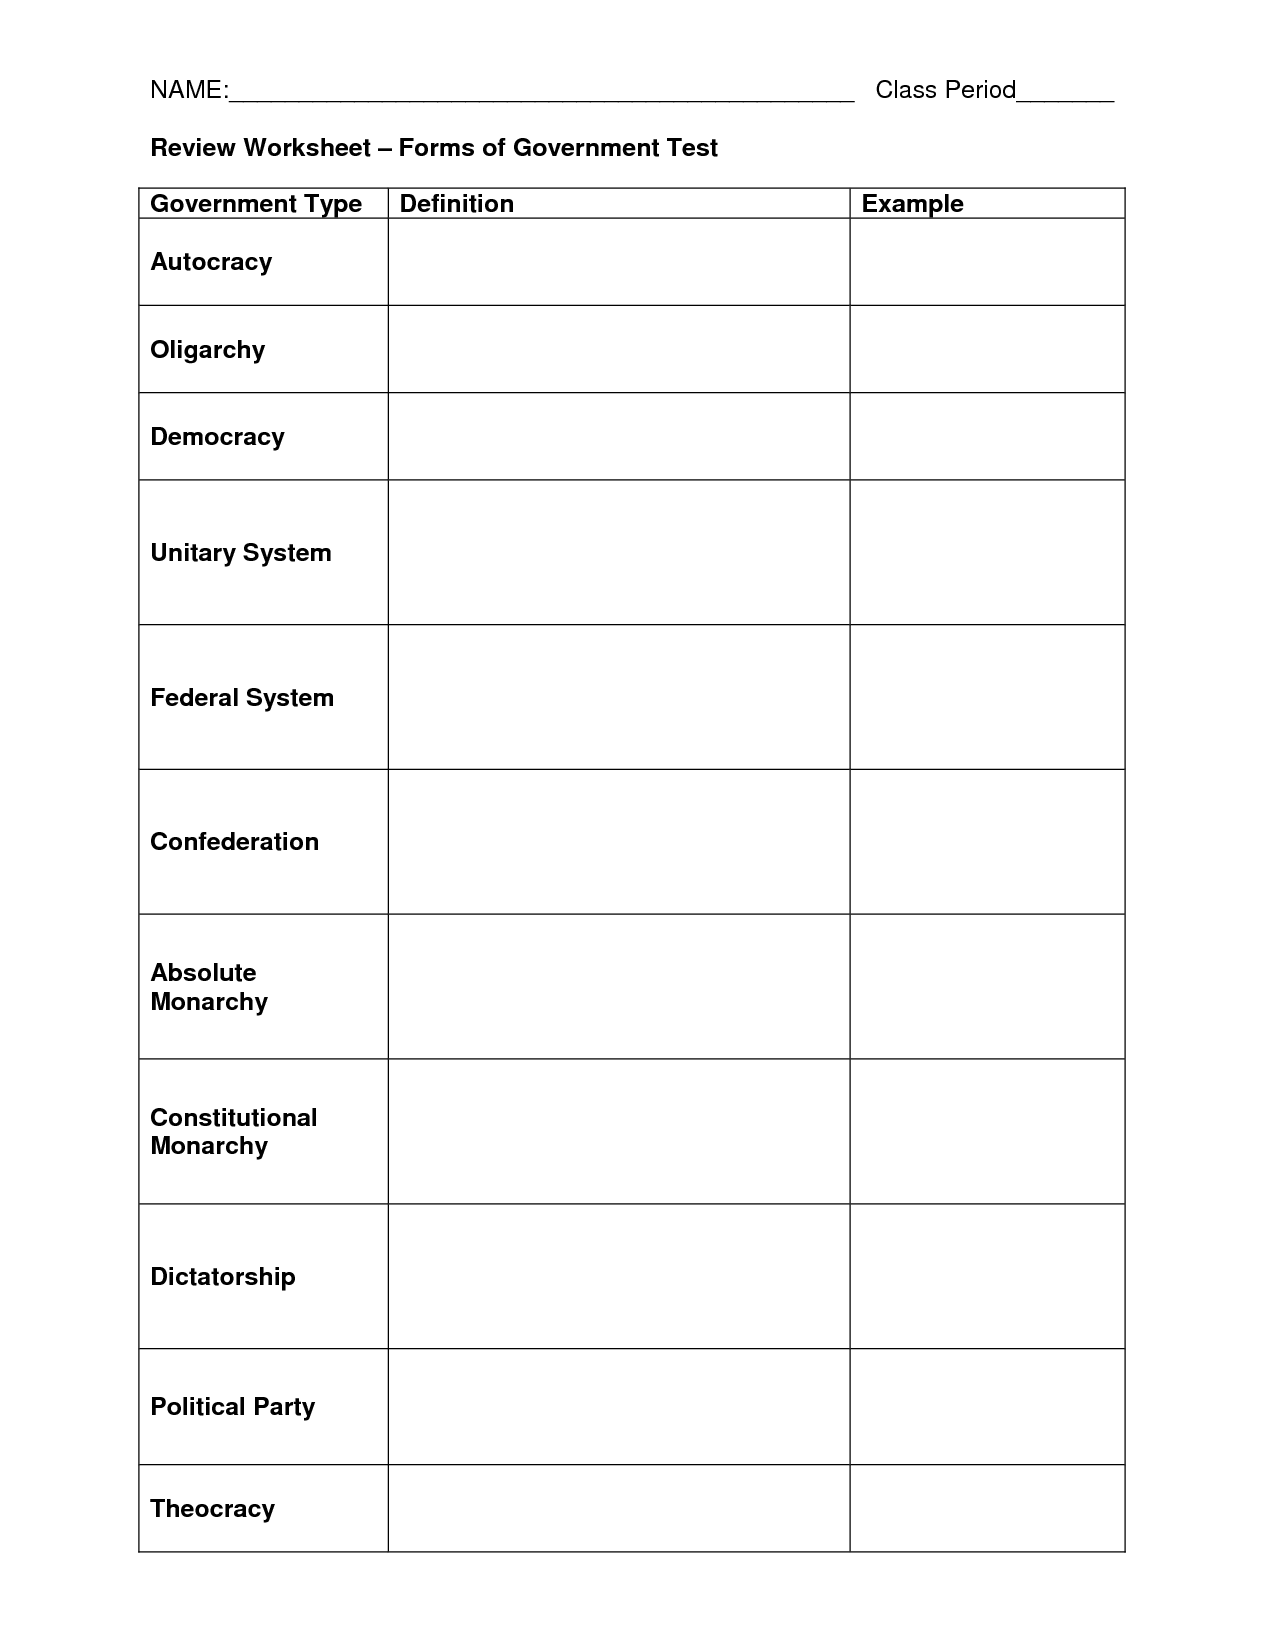 17-the-branches-of-government-worksheet-worksheeto